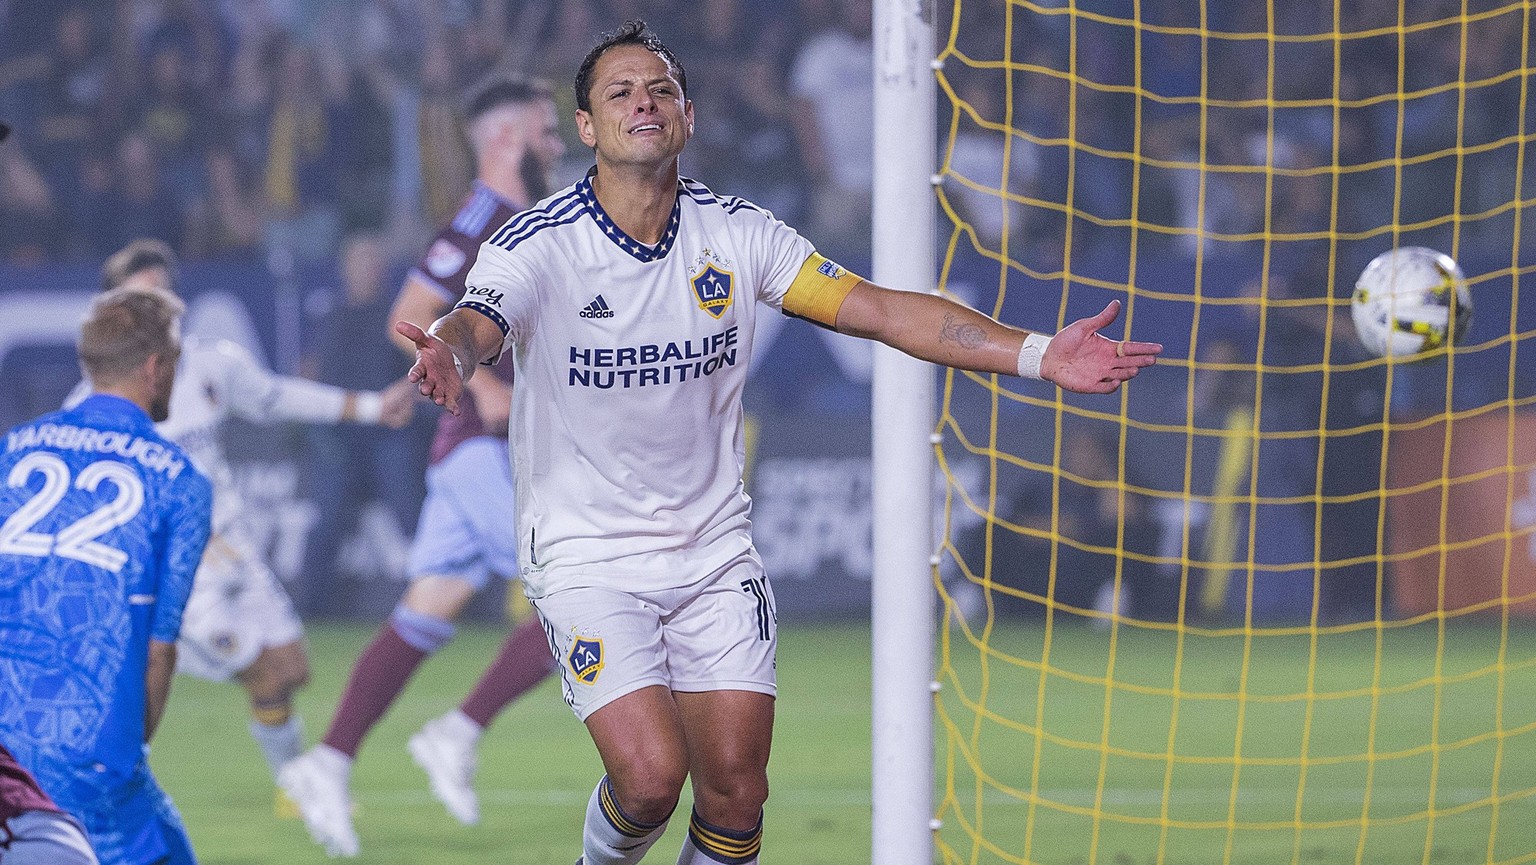 September 17, 2022, Carson, California, USA: Javier Chicharito Hernandez 14 of the L.A. Galaxy celebrates after scoring a goal during their MLS, Fussball Herren, USA Season game against the Colorado R ...